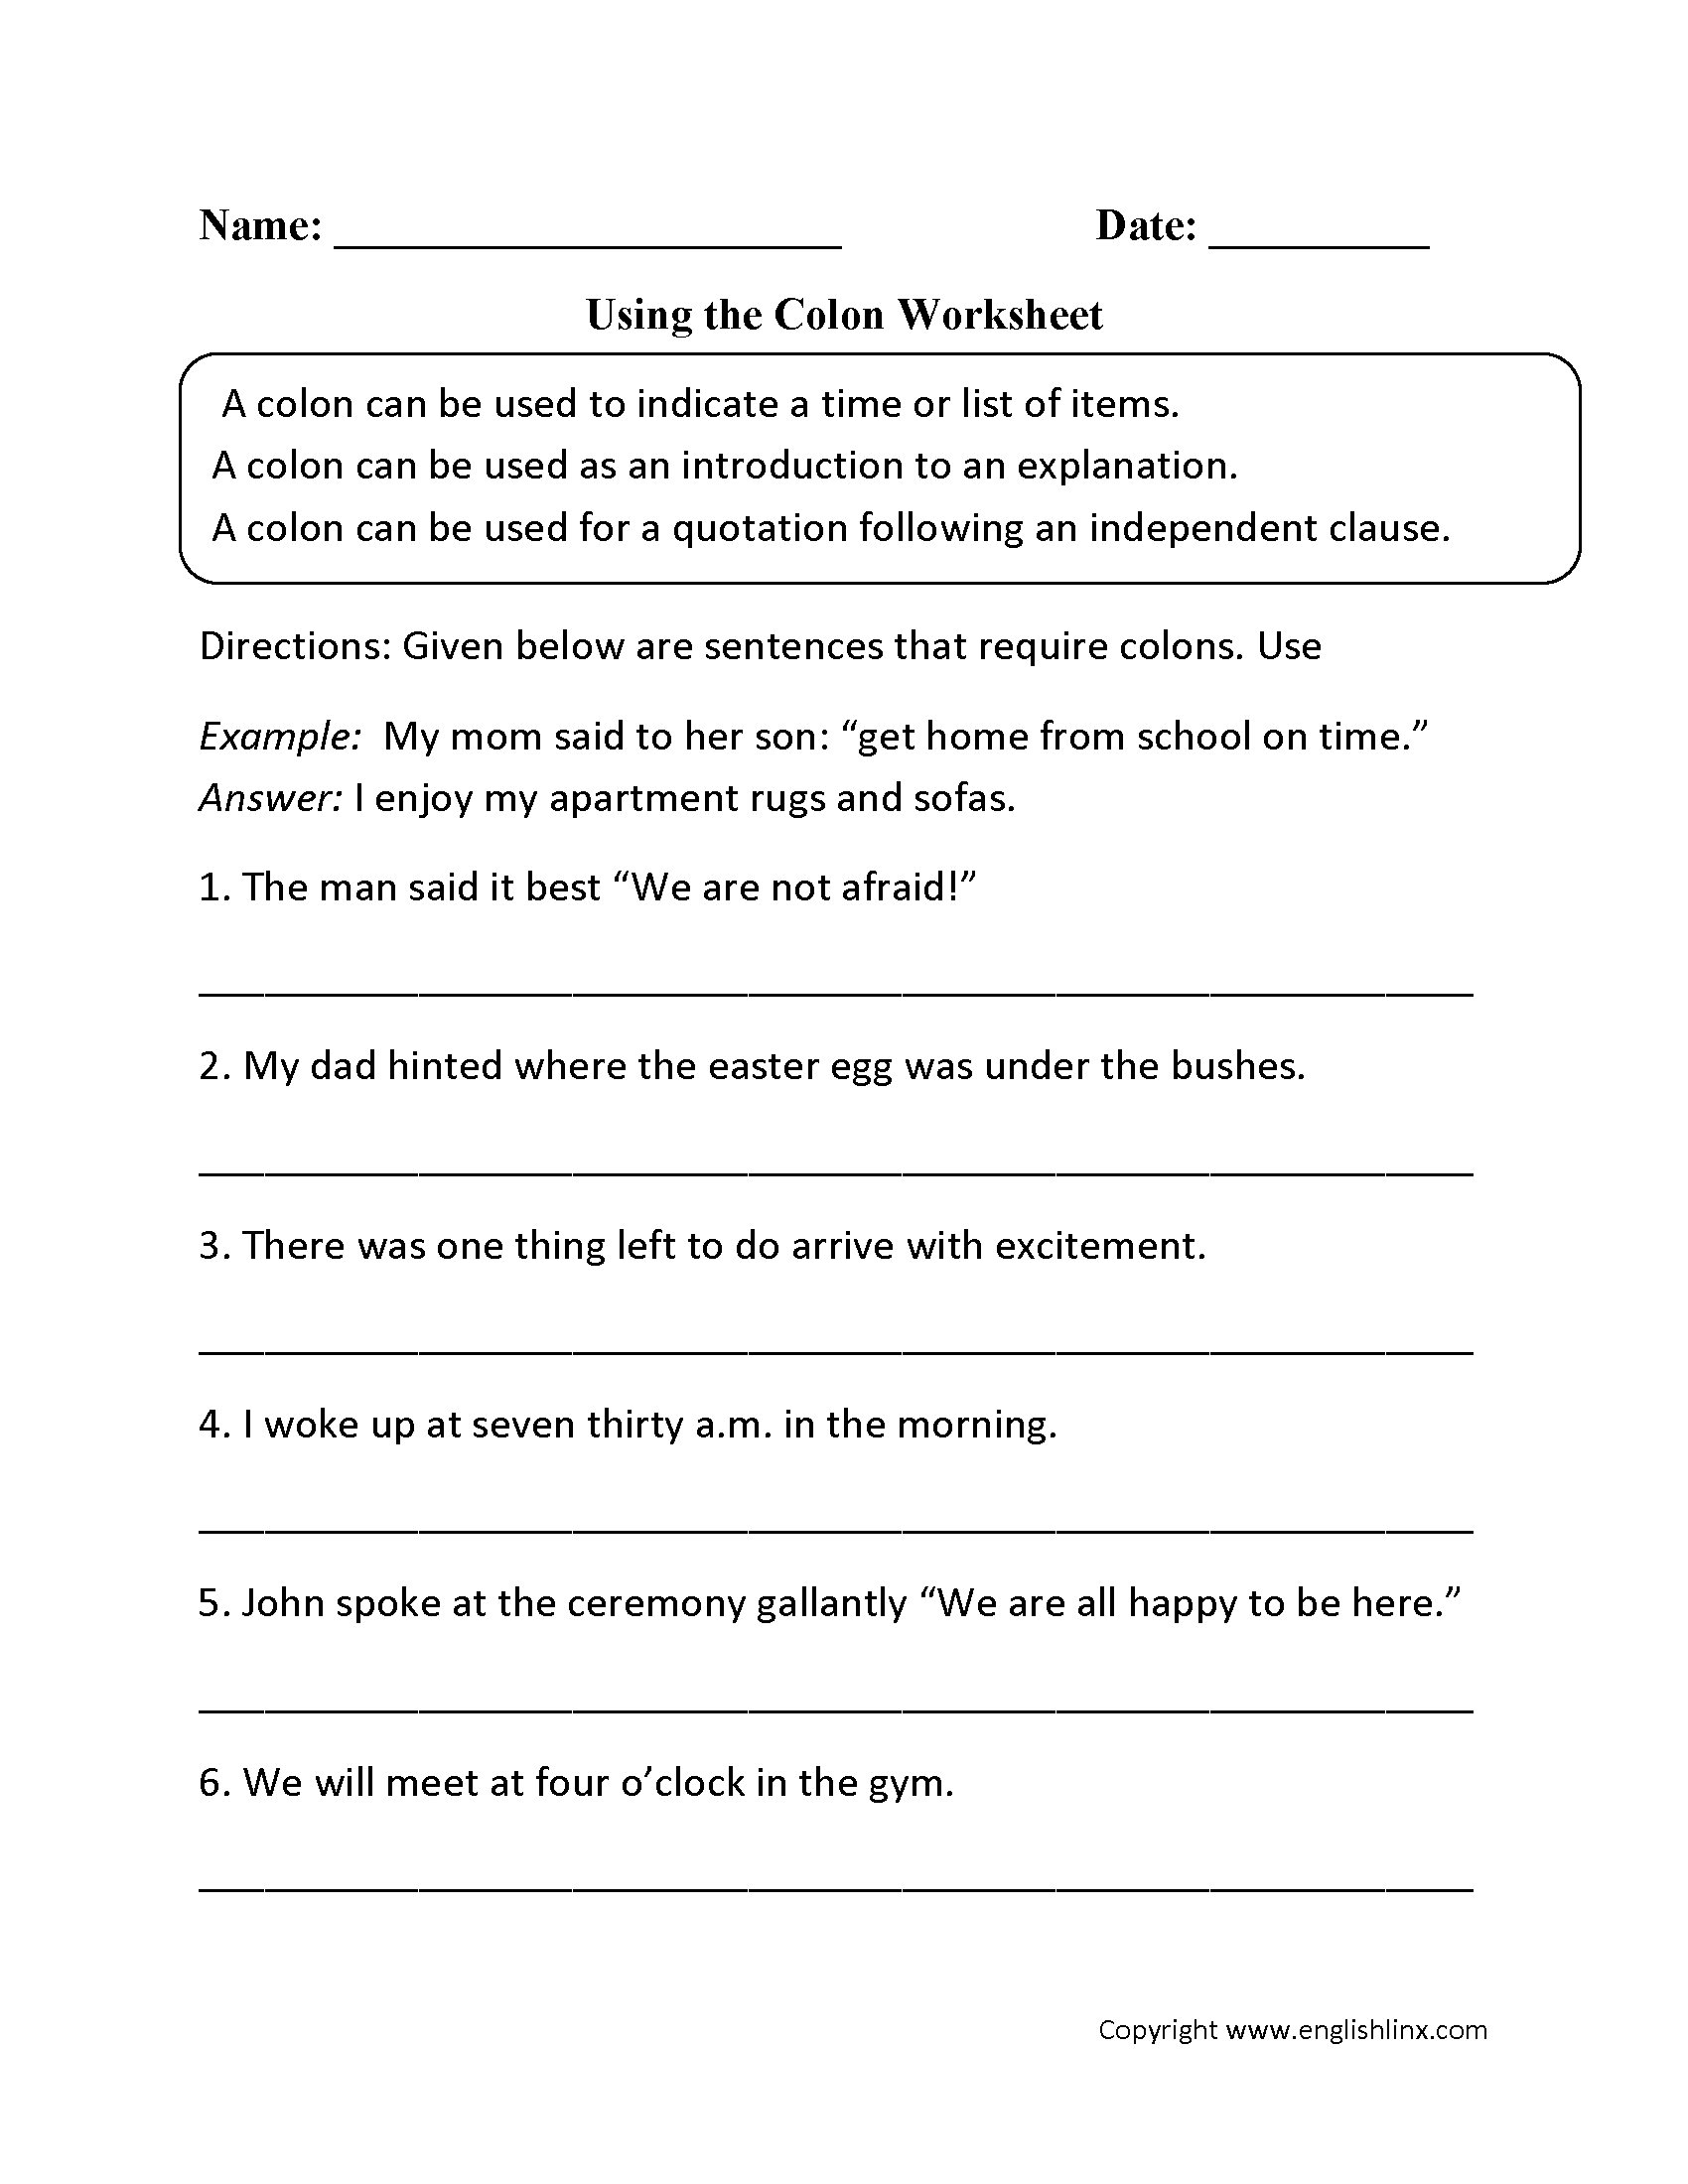 Using the Colon Worksheets